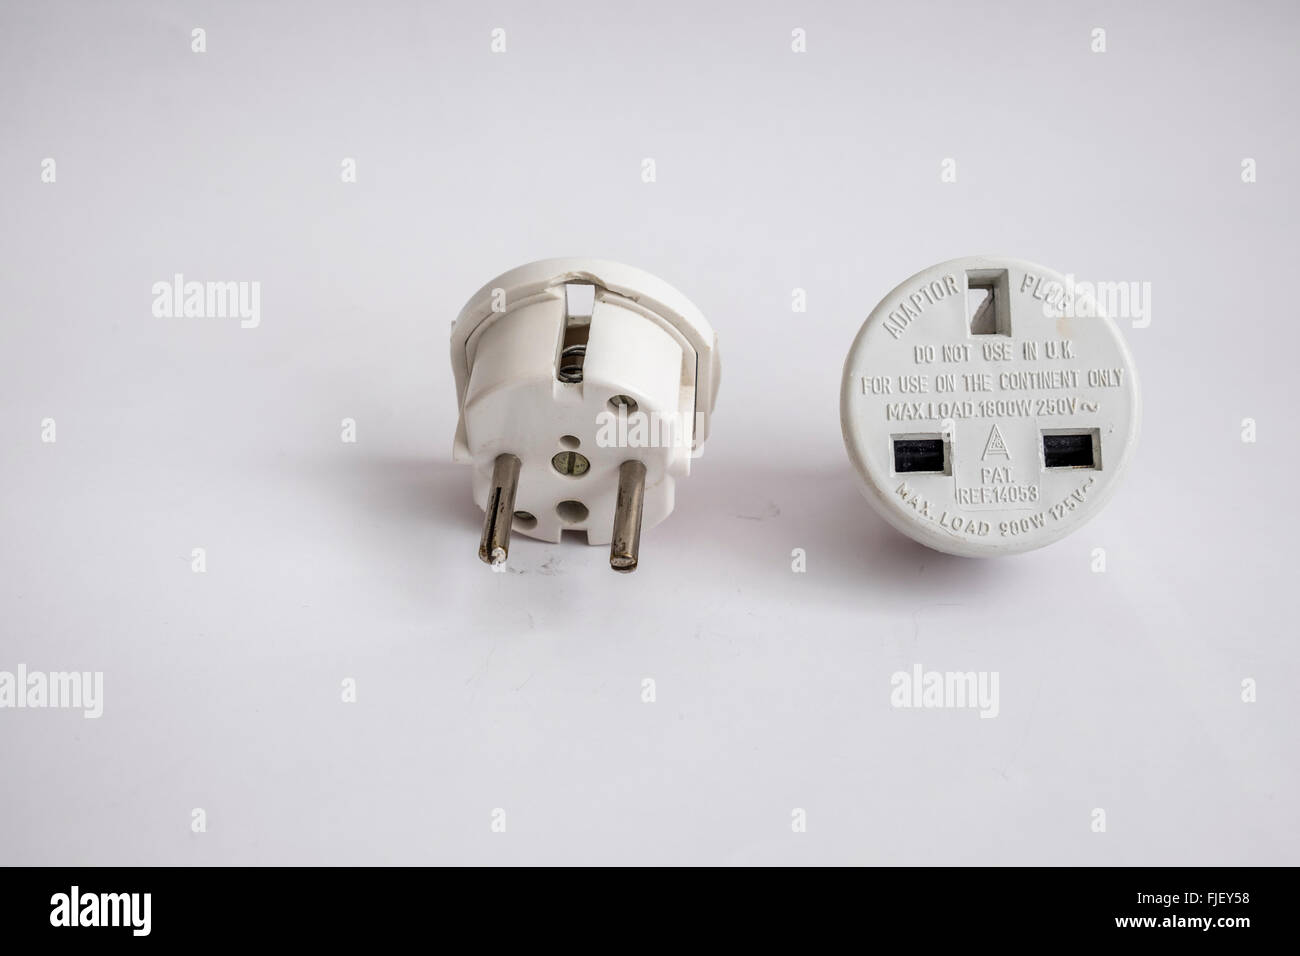 Mains adapter plug with 13 amp 3 pin socket converted to 2 round pins for use in Europe. Stock Photo